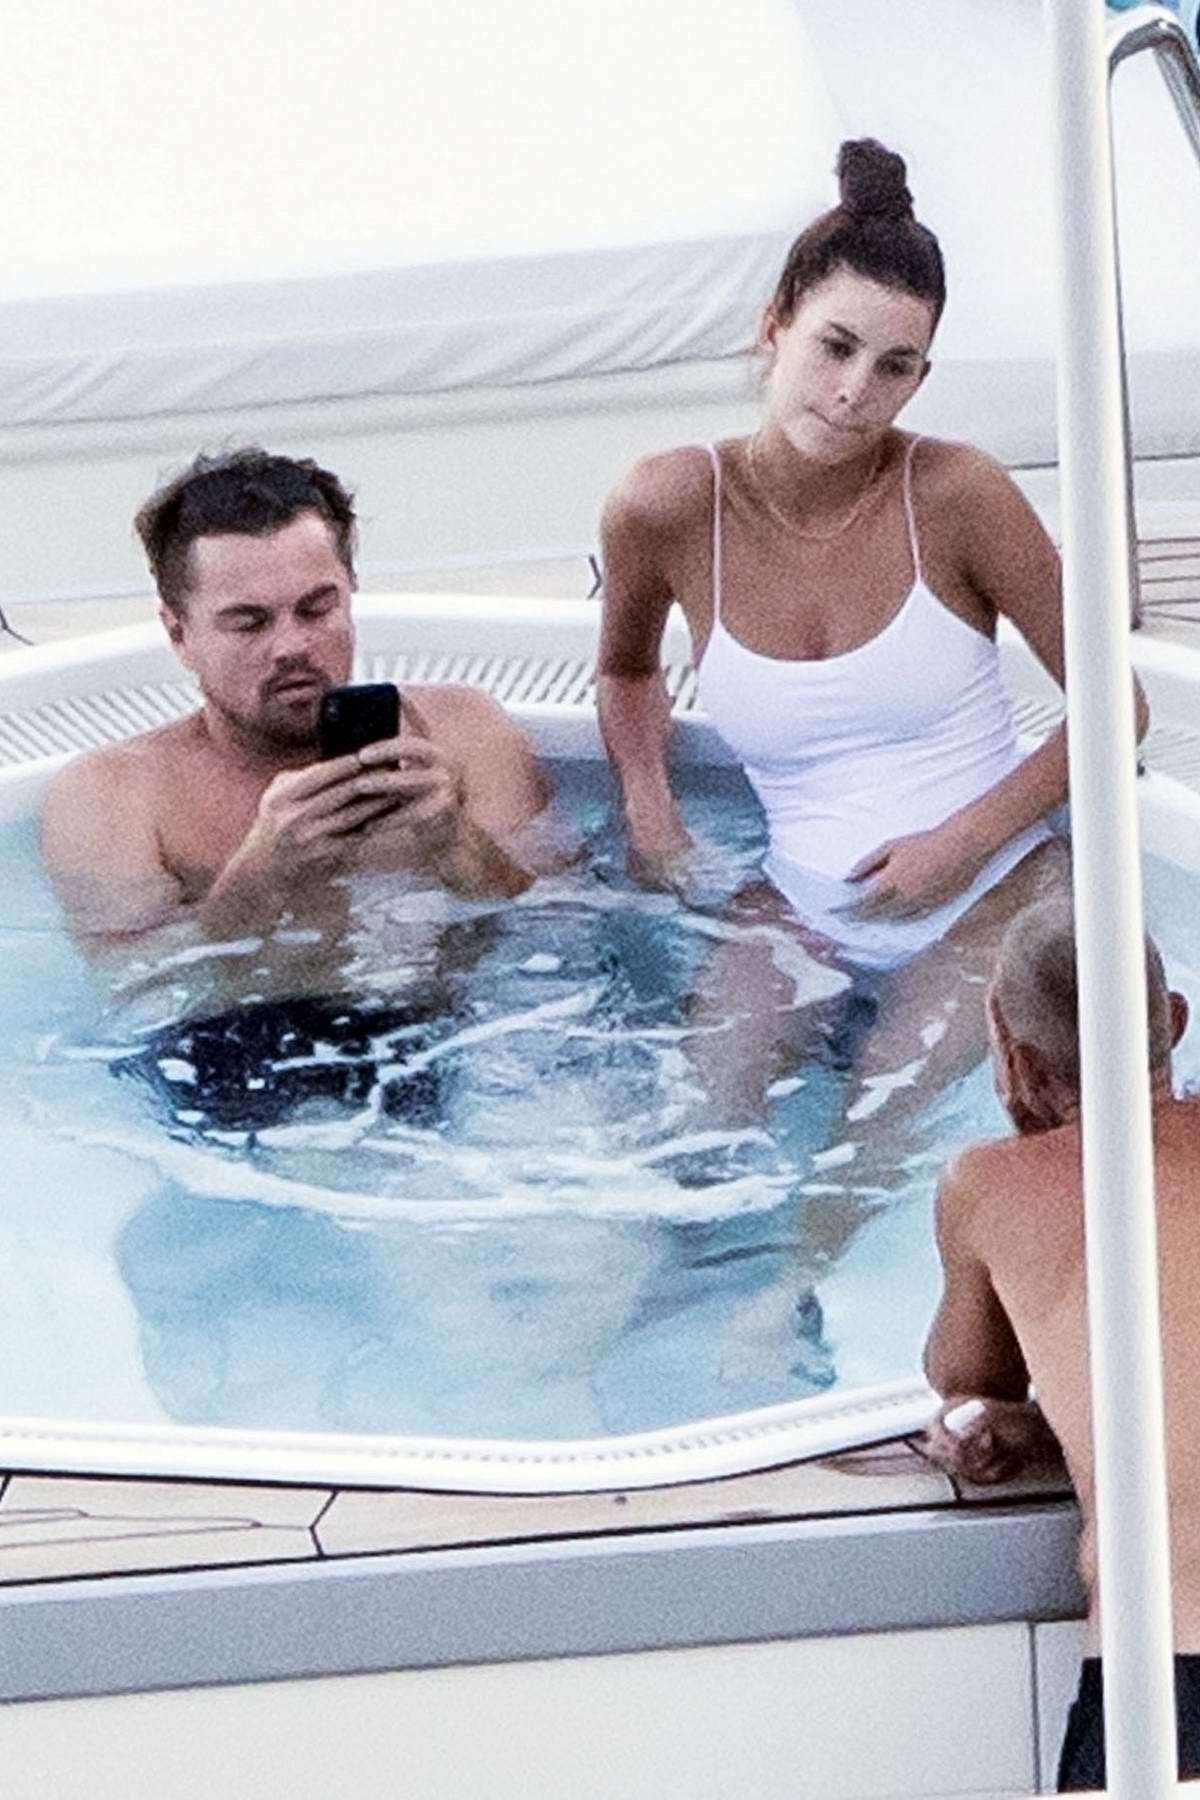 Camila Morrone And Leonardo Dicaprio Have A Good Time In A Hot Tub While On Vacation In Positano 